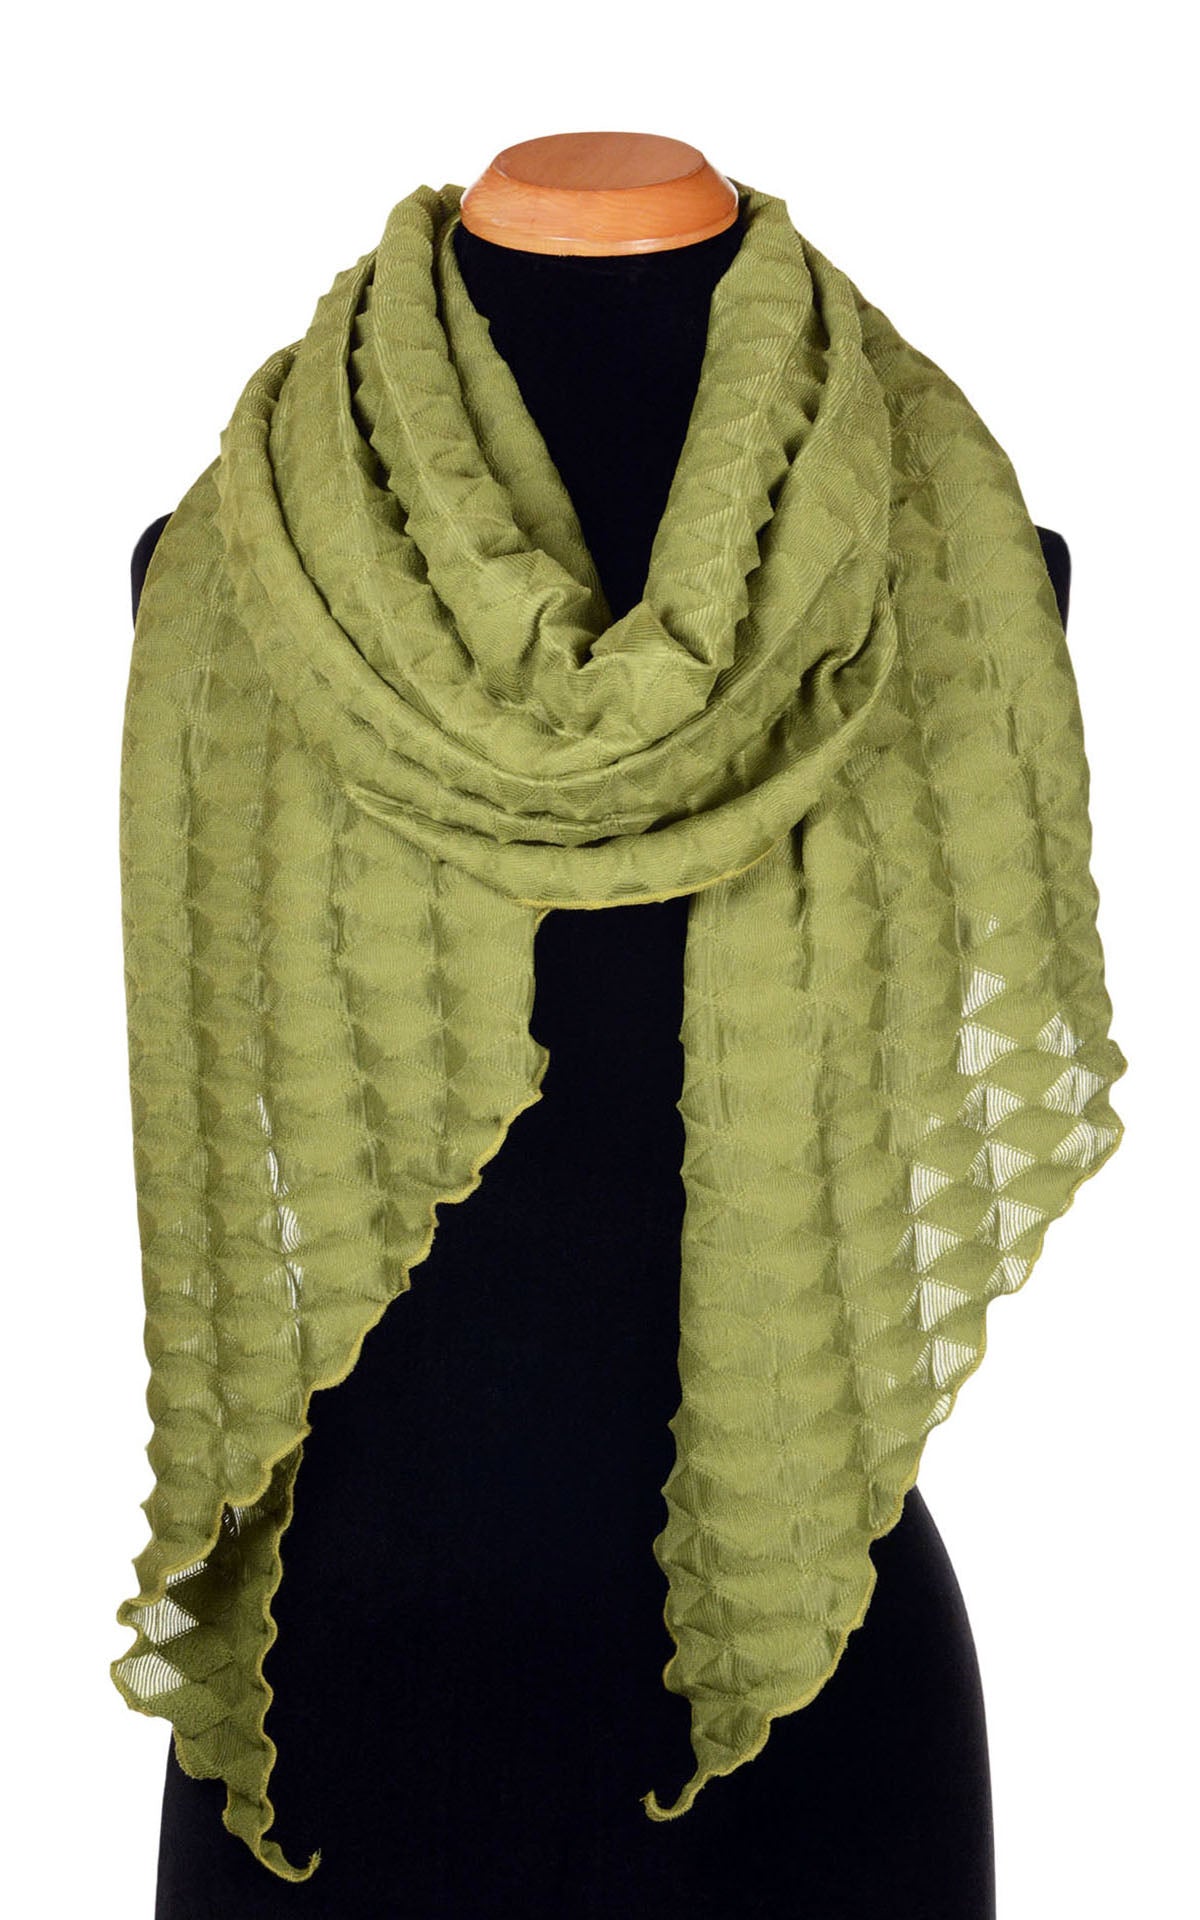 Handkerchief Scarf in Avocado Green from our Fractal Collection. Shown wrapped loosely on product model. LYC by Pandemonium is handmade in Seattle, WA, USA.